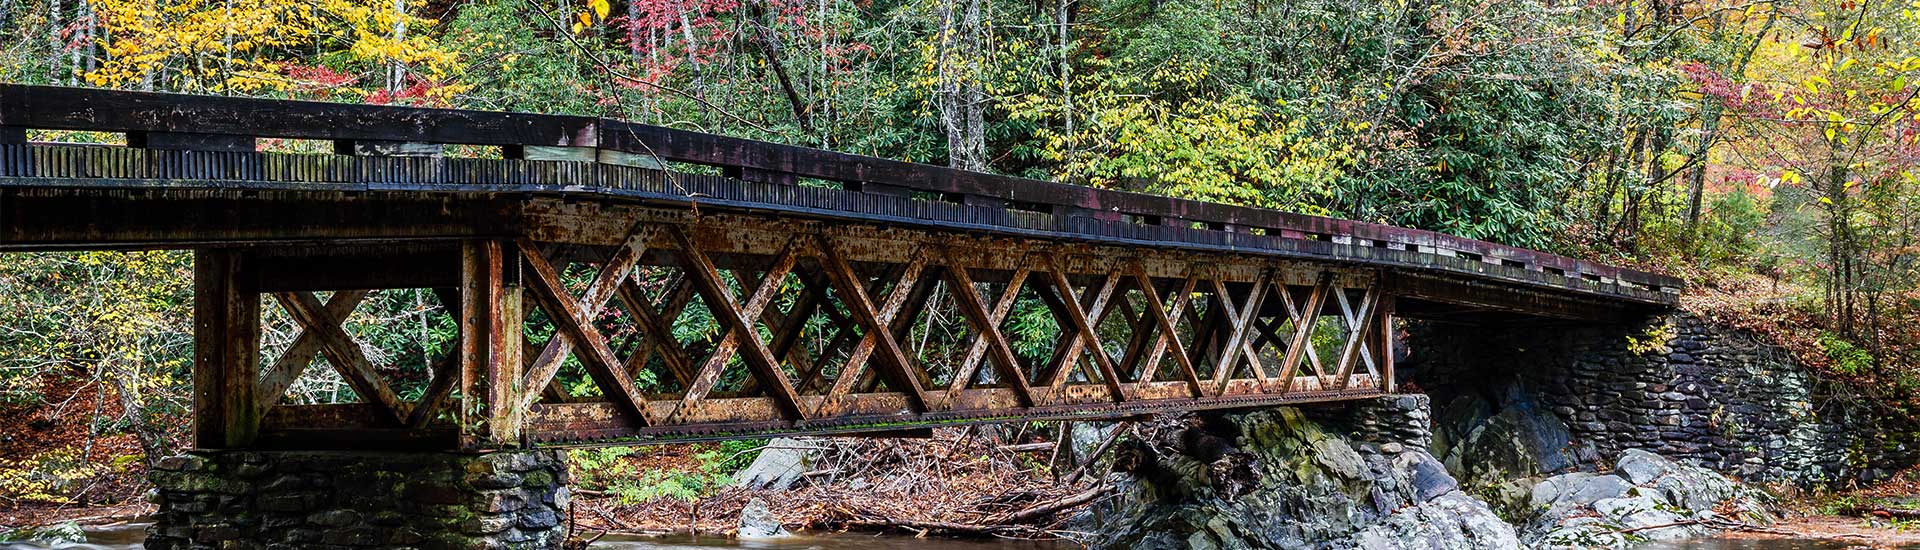 Antique, steel bridge crossing over the Little River in Elkmont, near Great Smoky Mountains National Park during Fall.